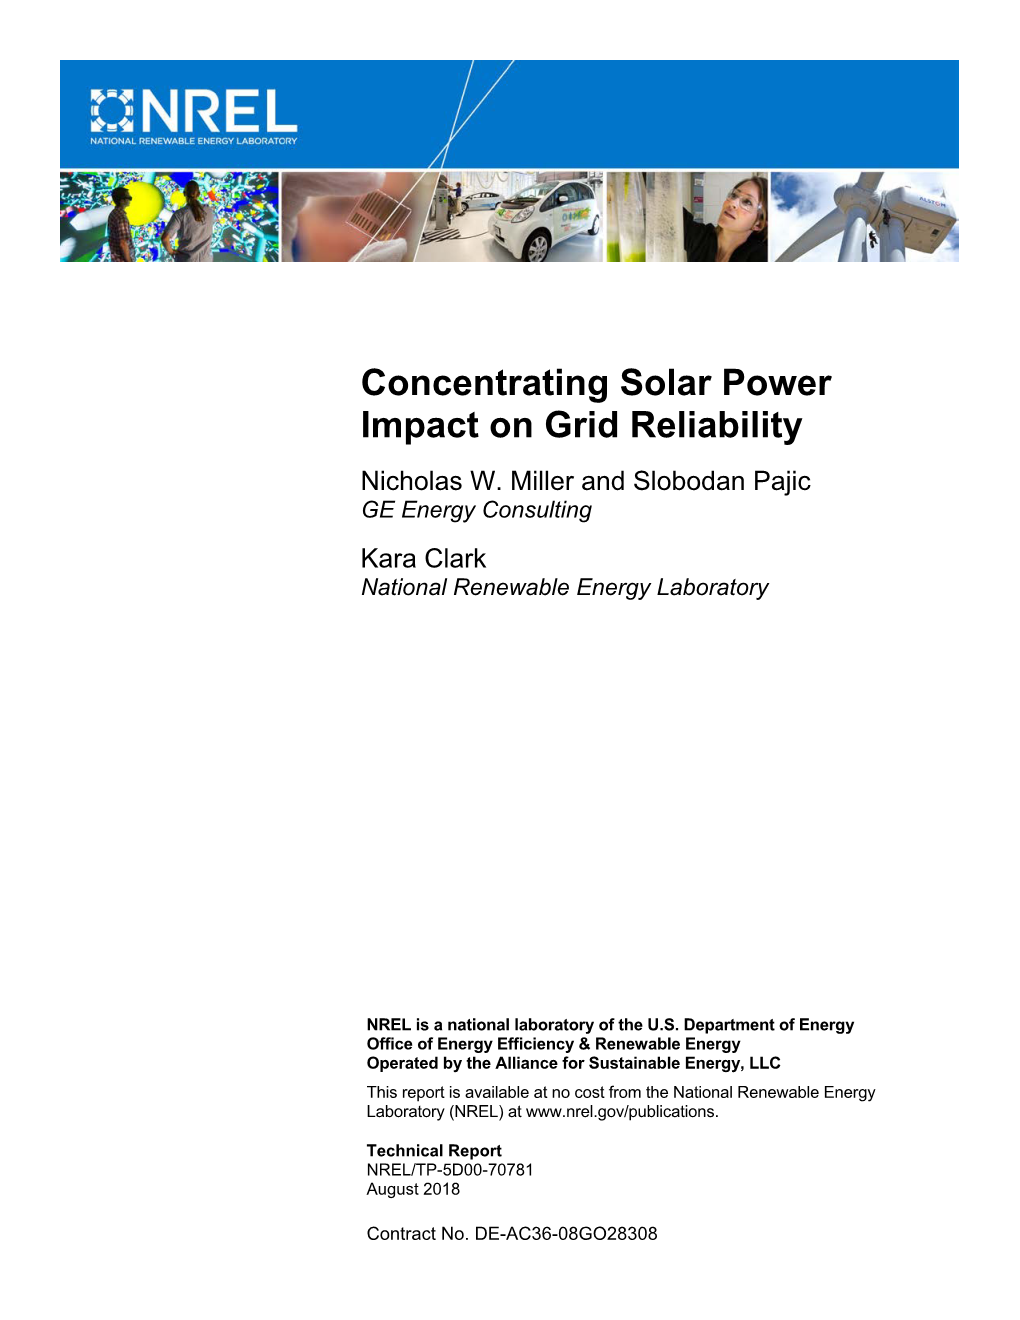 Concentrating Solar Power Impact on Grid Reliability Nicholas W